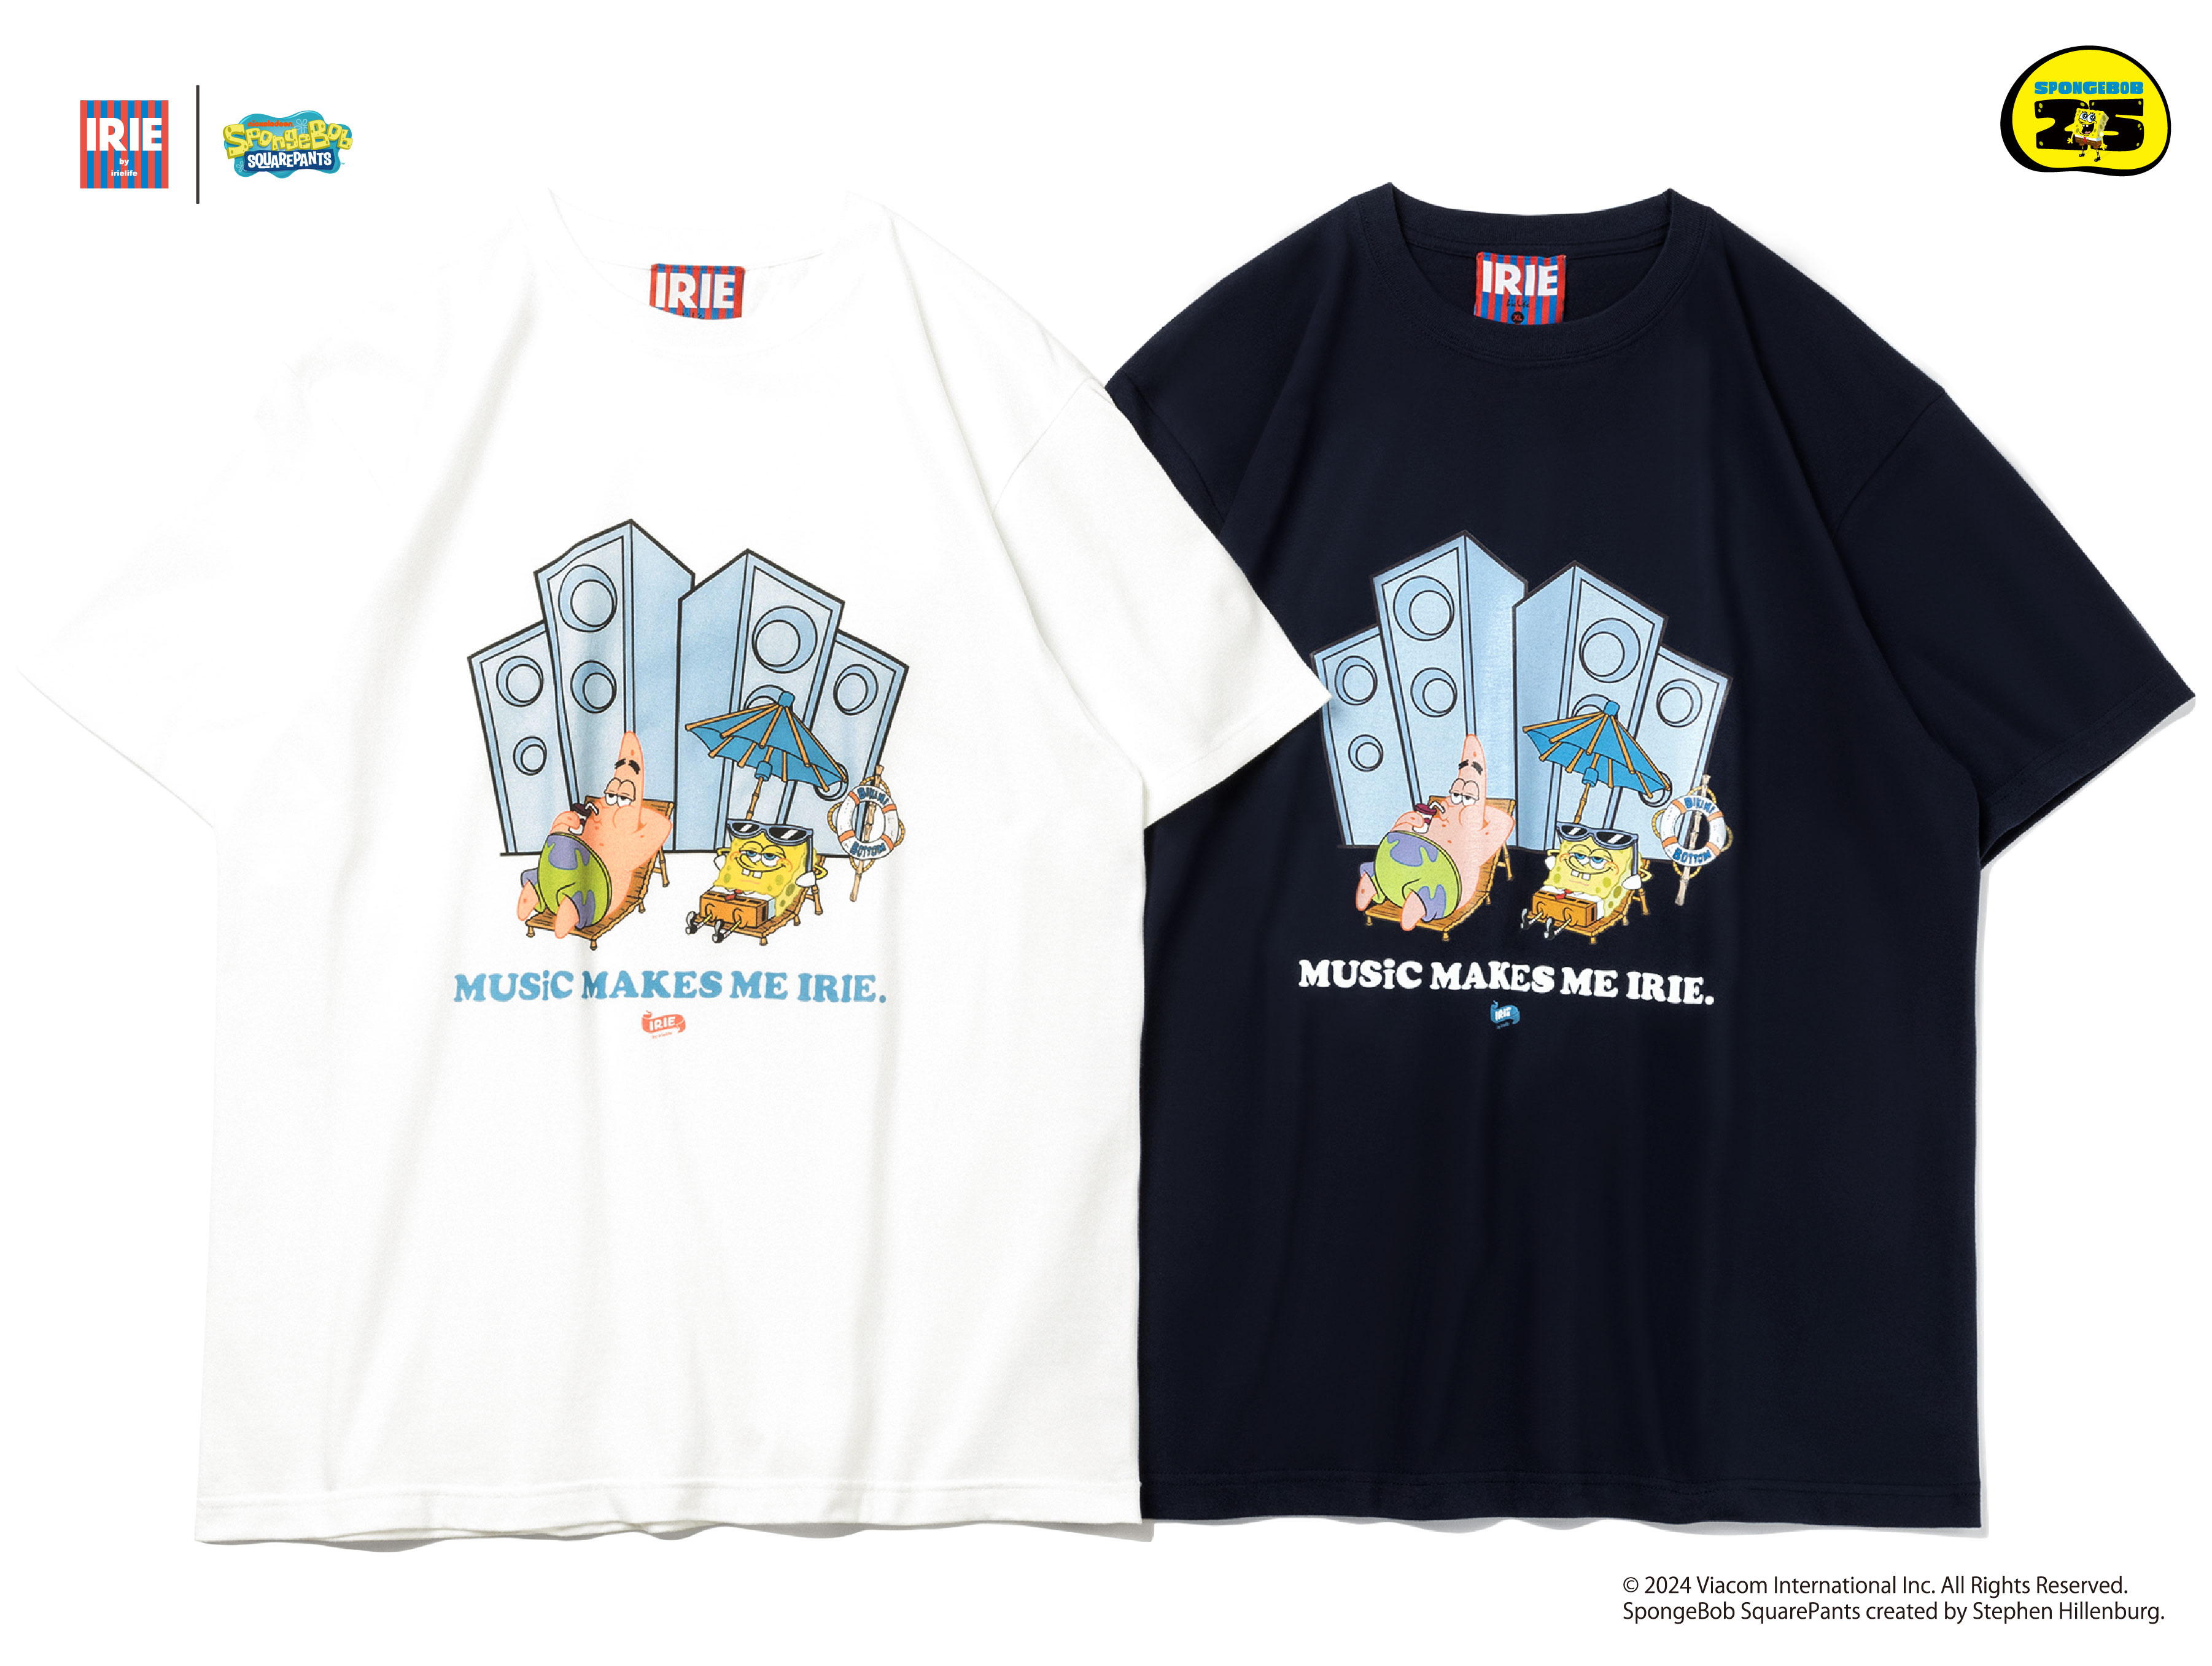 【×SPONGEBOB】CHILL OUT TEE - IRIE by irielife